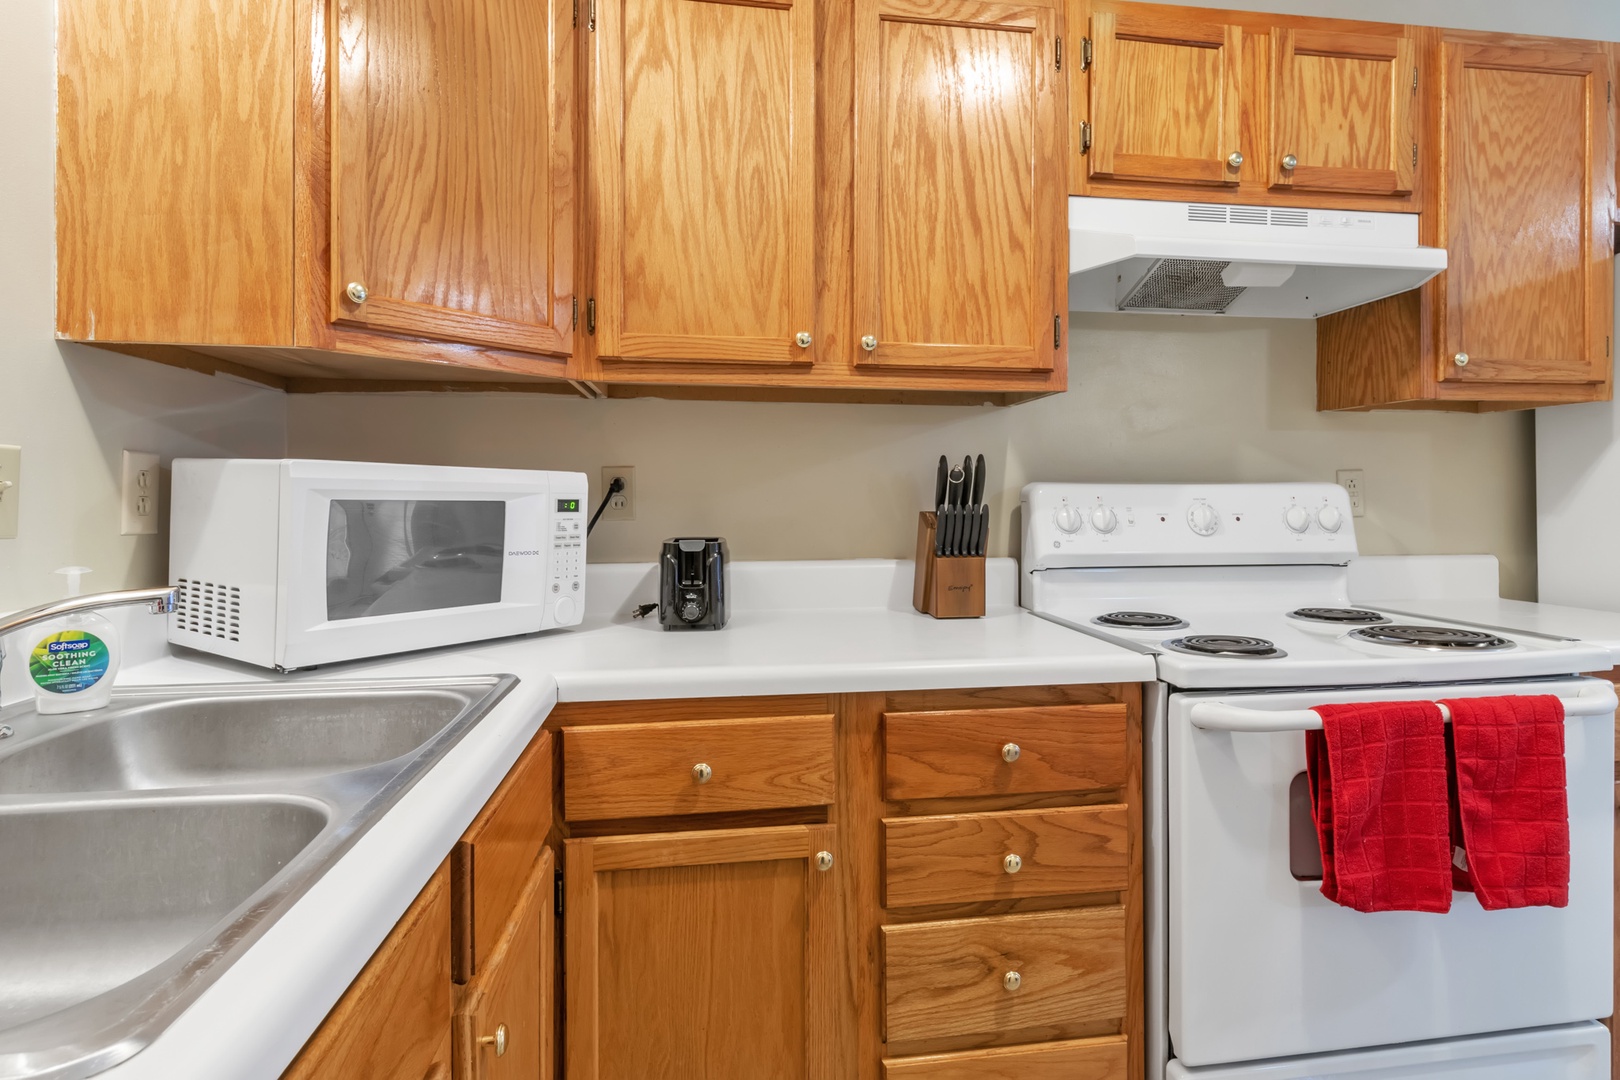 The cozy kitchen offers ample space & all the comforts of home